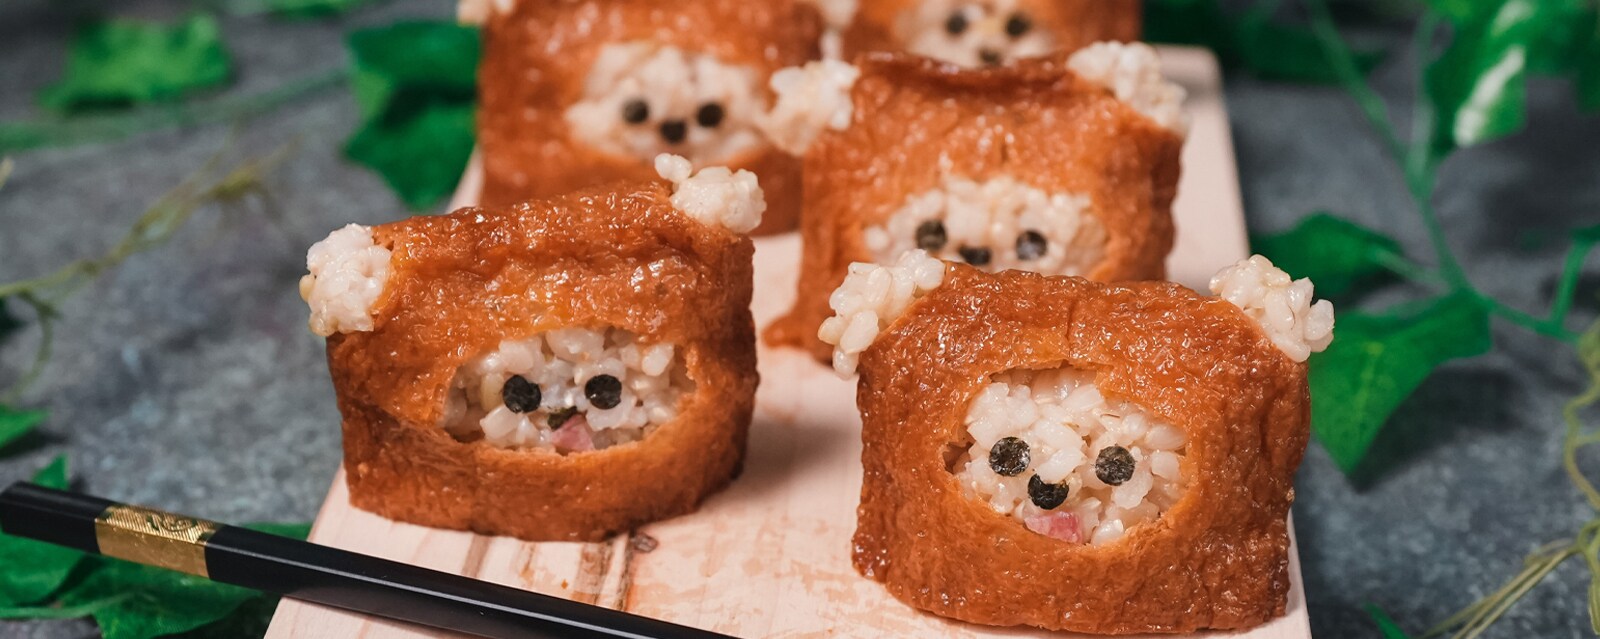 Ewok sushi on a plate. 